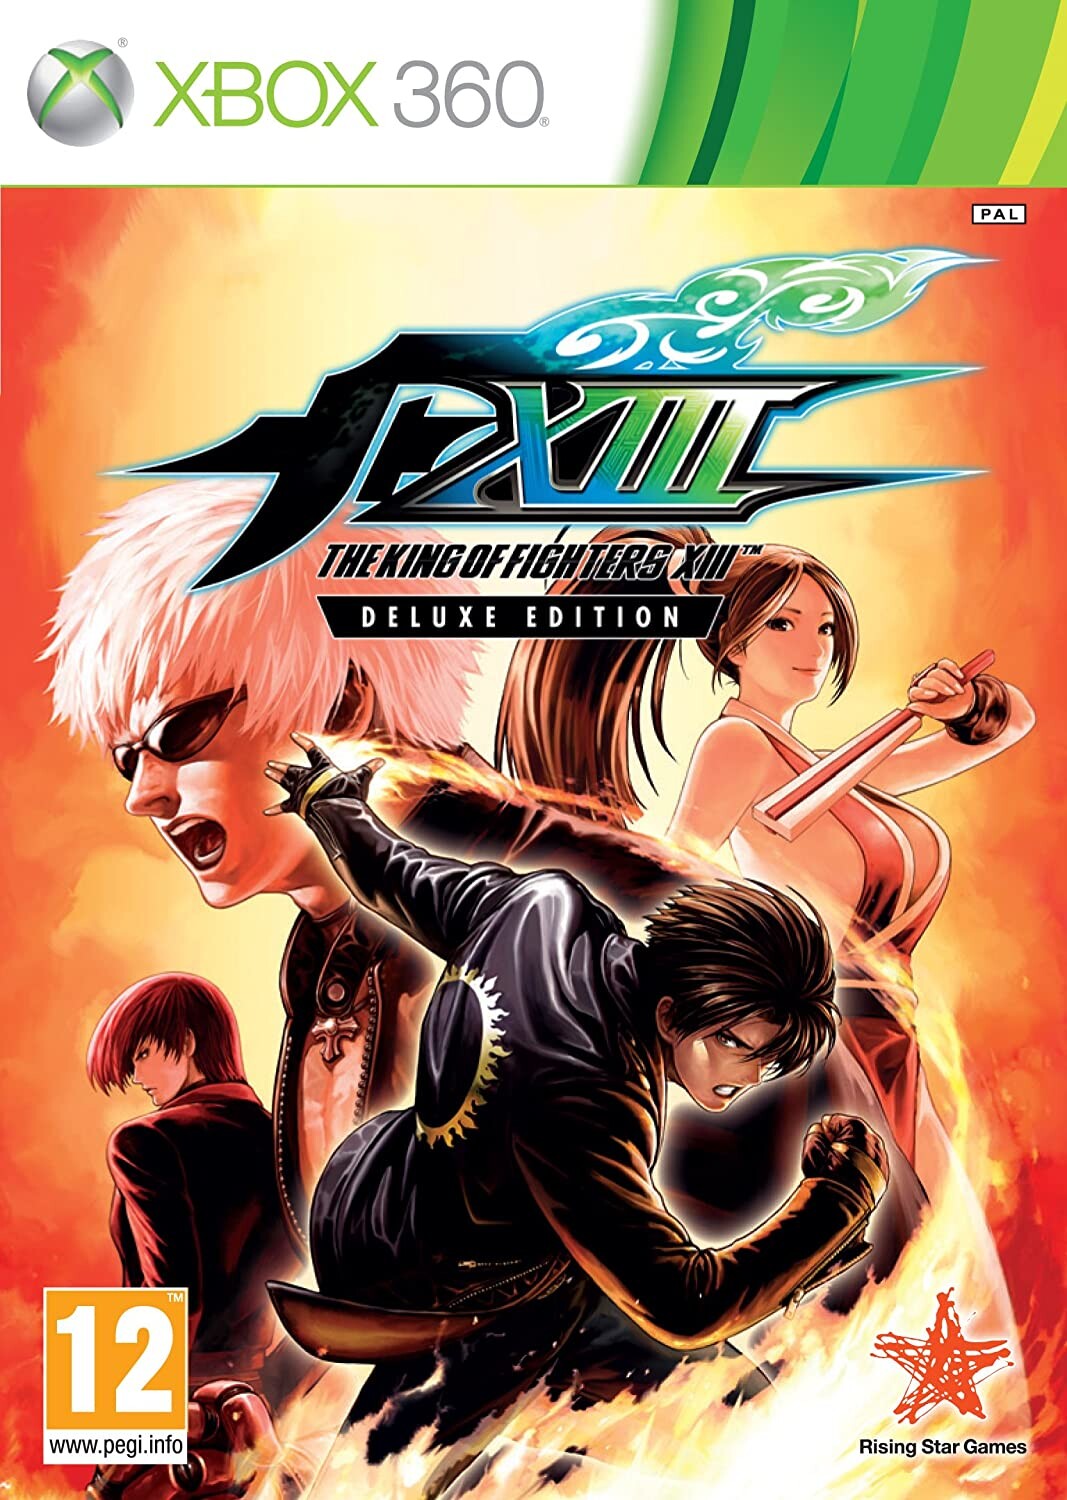 XBOX 360 THE KING OF FIGHTERS XII - USADO